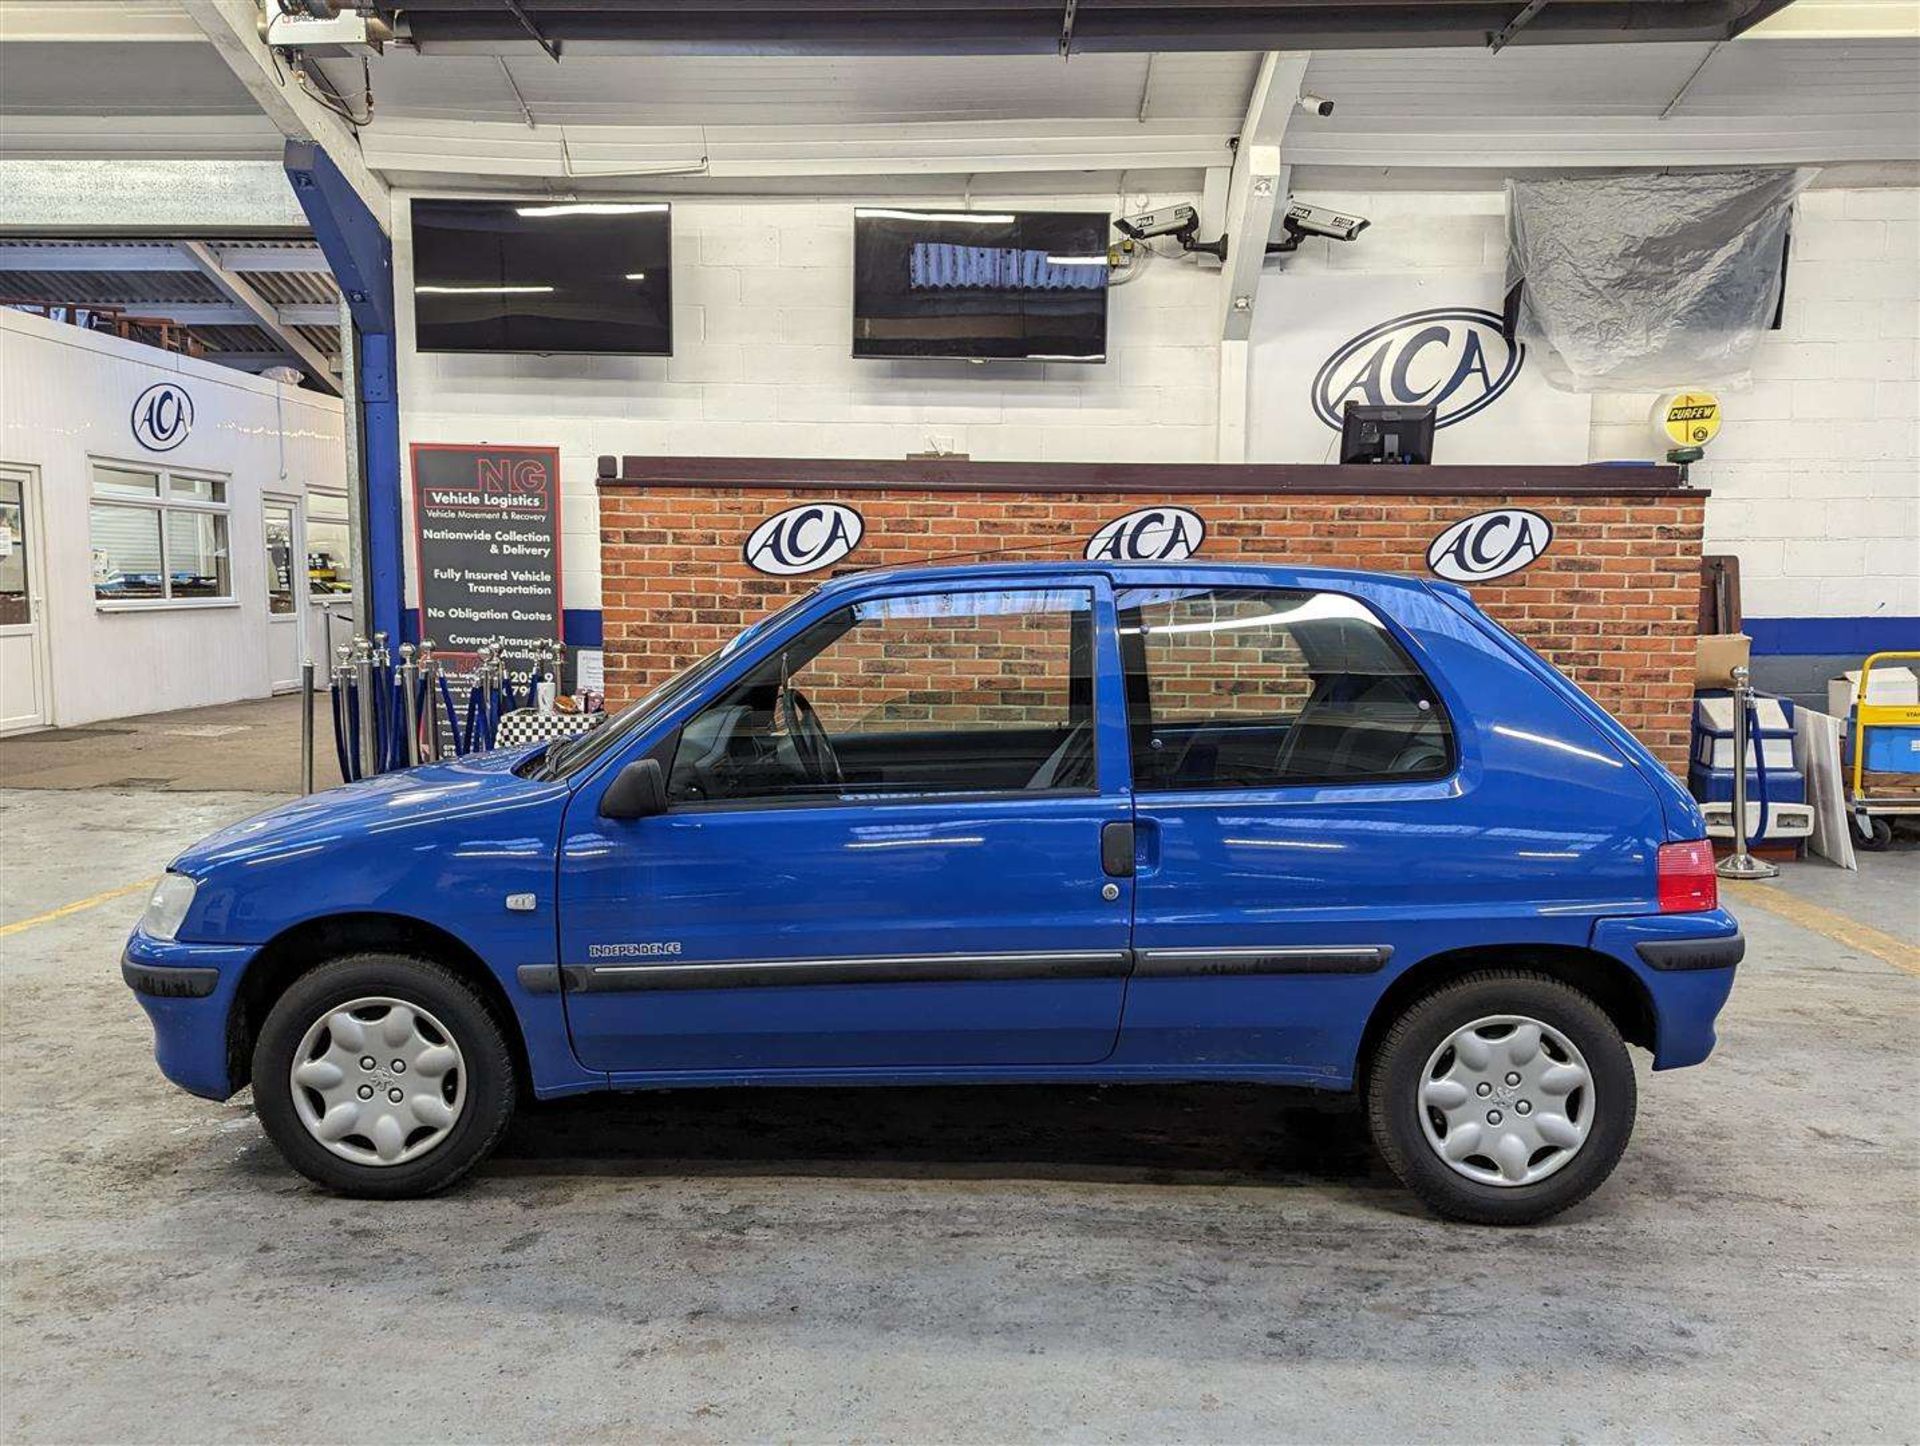 2003 PEUGEOT 106 INDEPENDENCE - Image 2 of 28